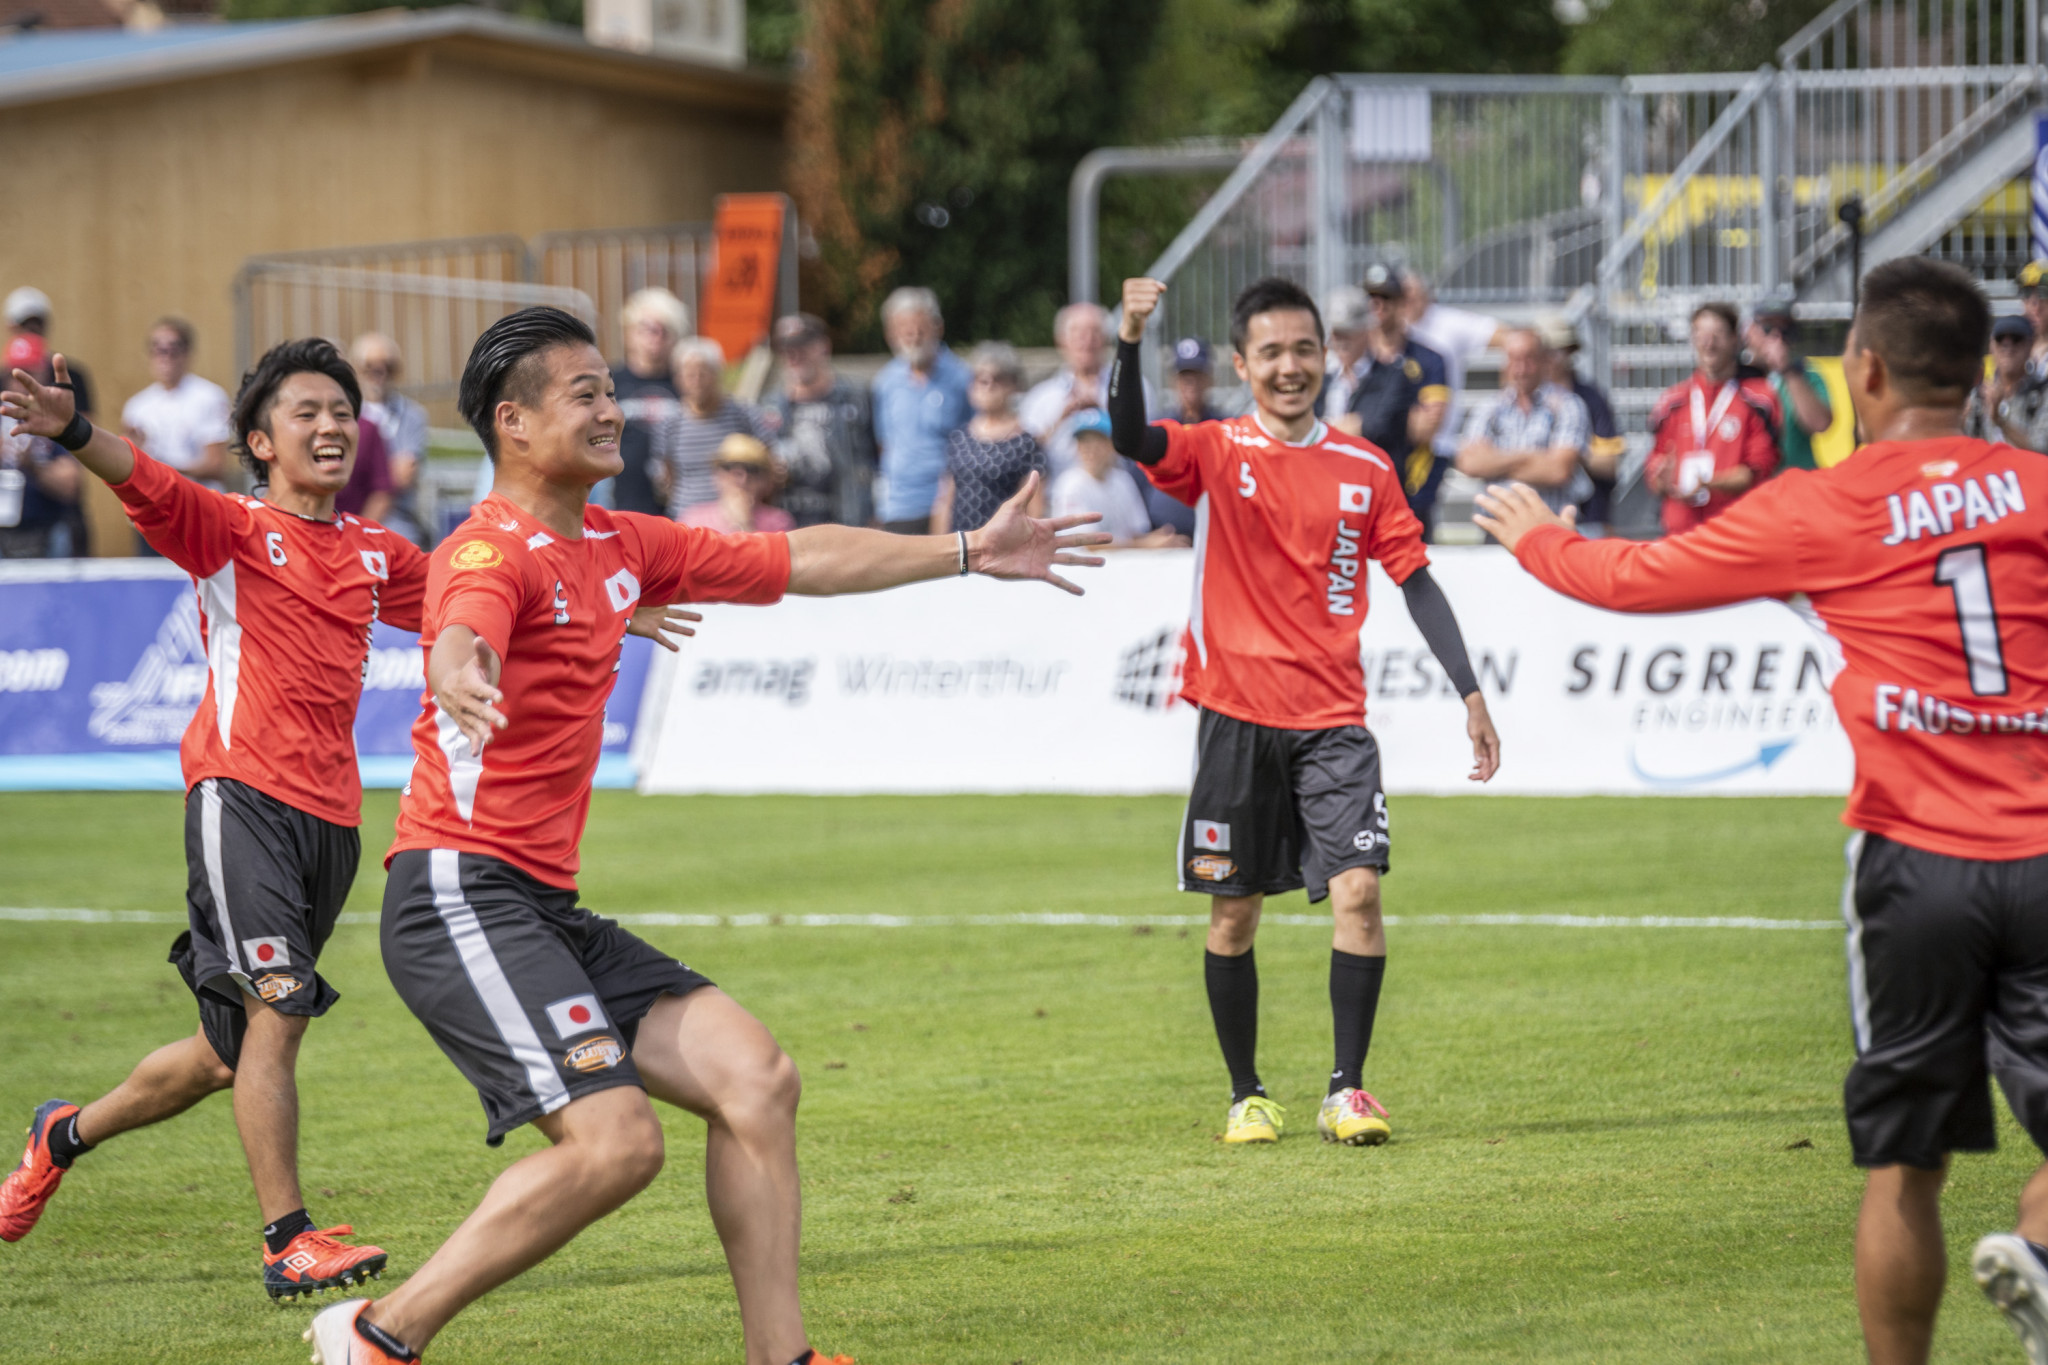 Japan claimed a memorable 3-1 win over The Netherlands in Group D ©IFA 2019 Fistball World Championship